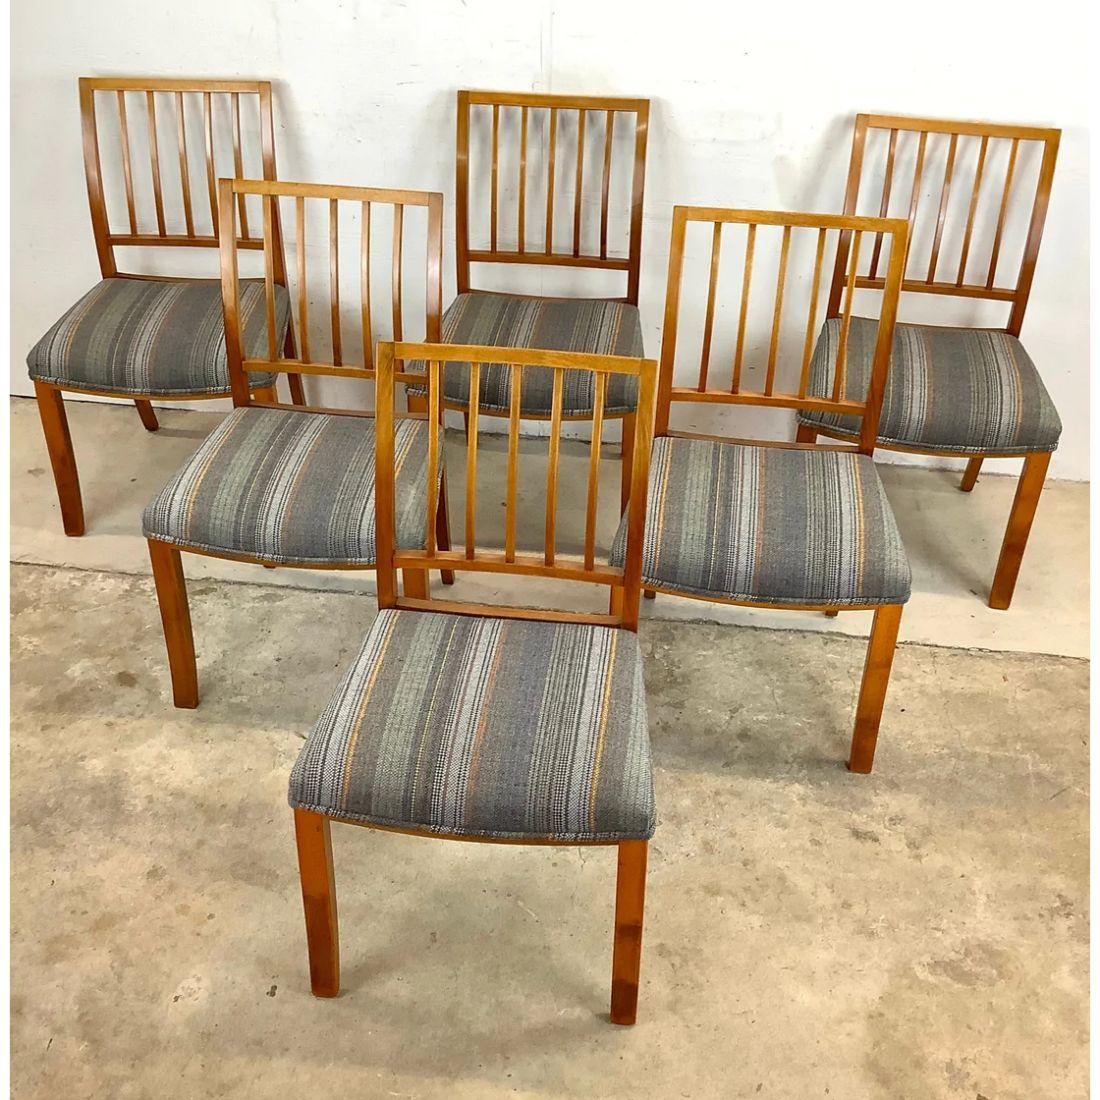 This matching set of six midcentury style dining chairs feature striking natural wood frames with sculpted seat backs and comfortable multi-color upholstered seats. The perfect set of six for dining room service or occasional kitchen seating, this